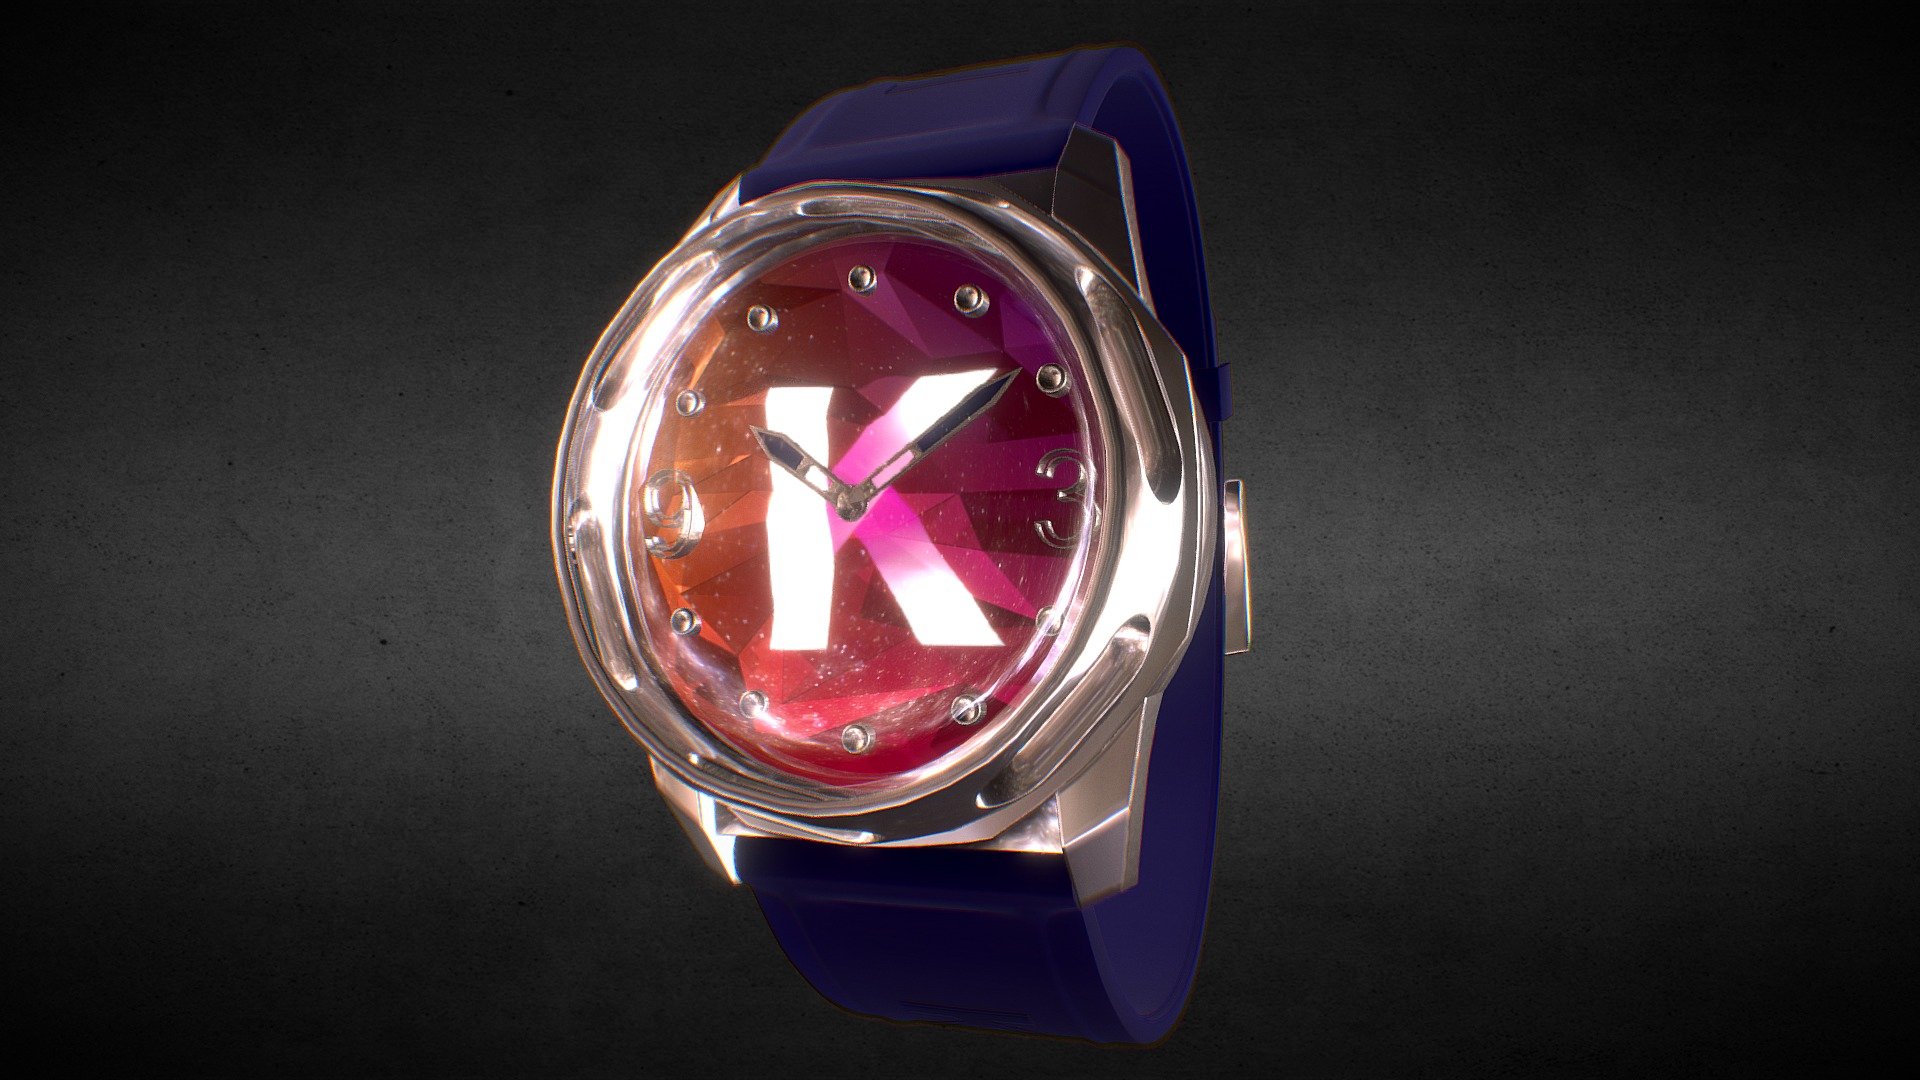 Awersome stainless steel Kadena coin Watch.

Currently available for download in FBX format.

3D model developed by AR-Watches 3d model